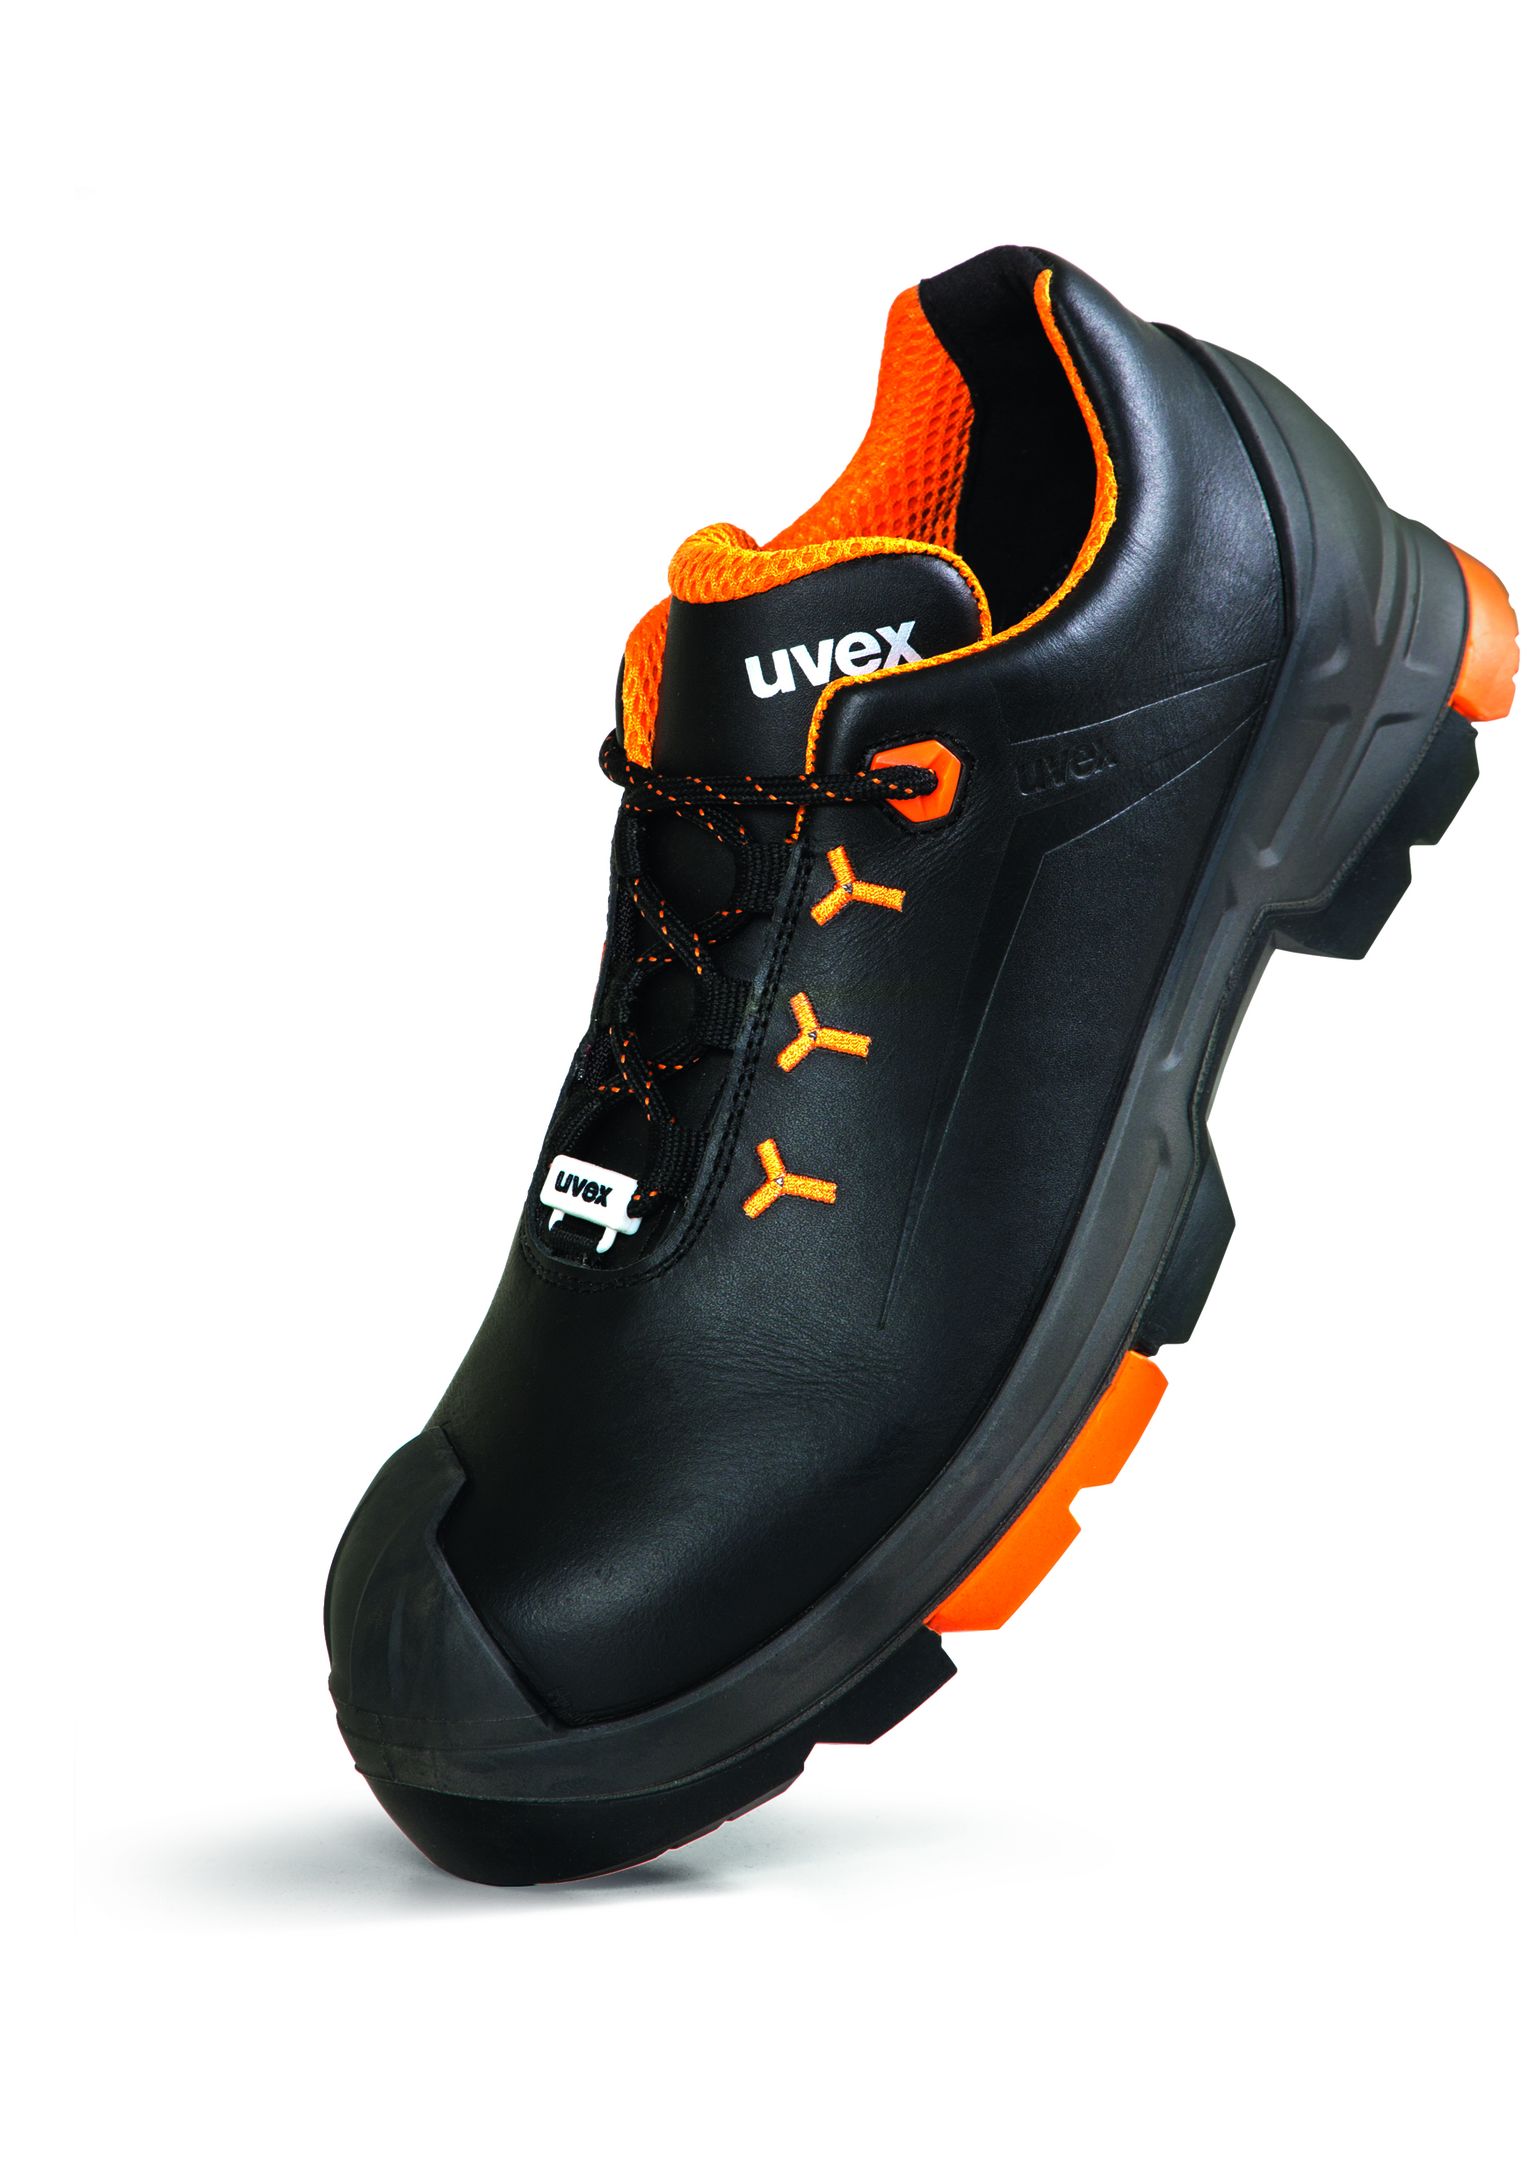 uvex 2 safety shoes